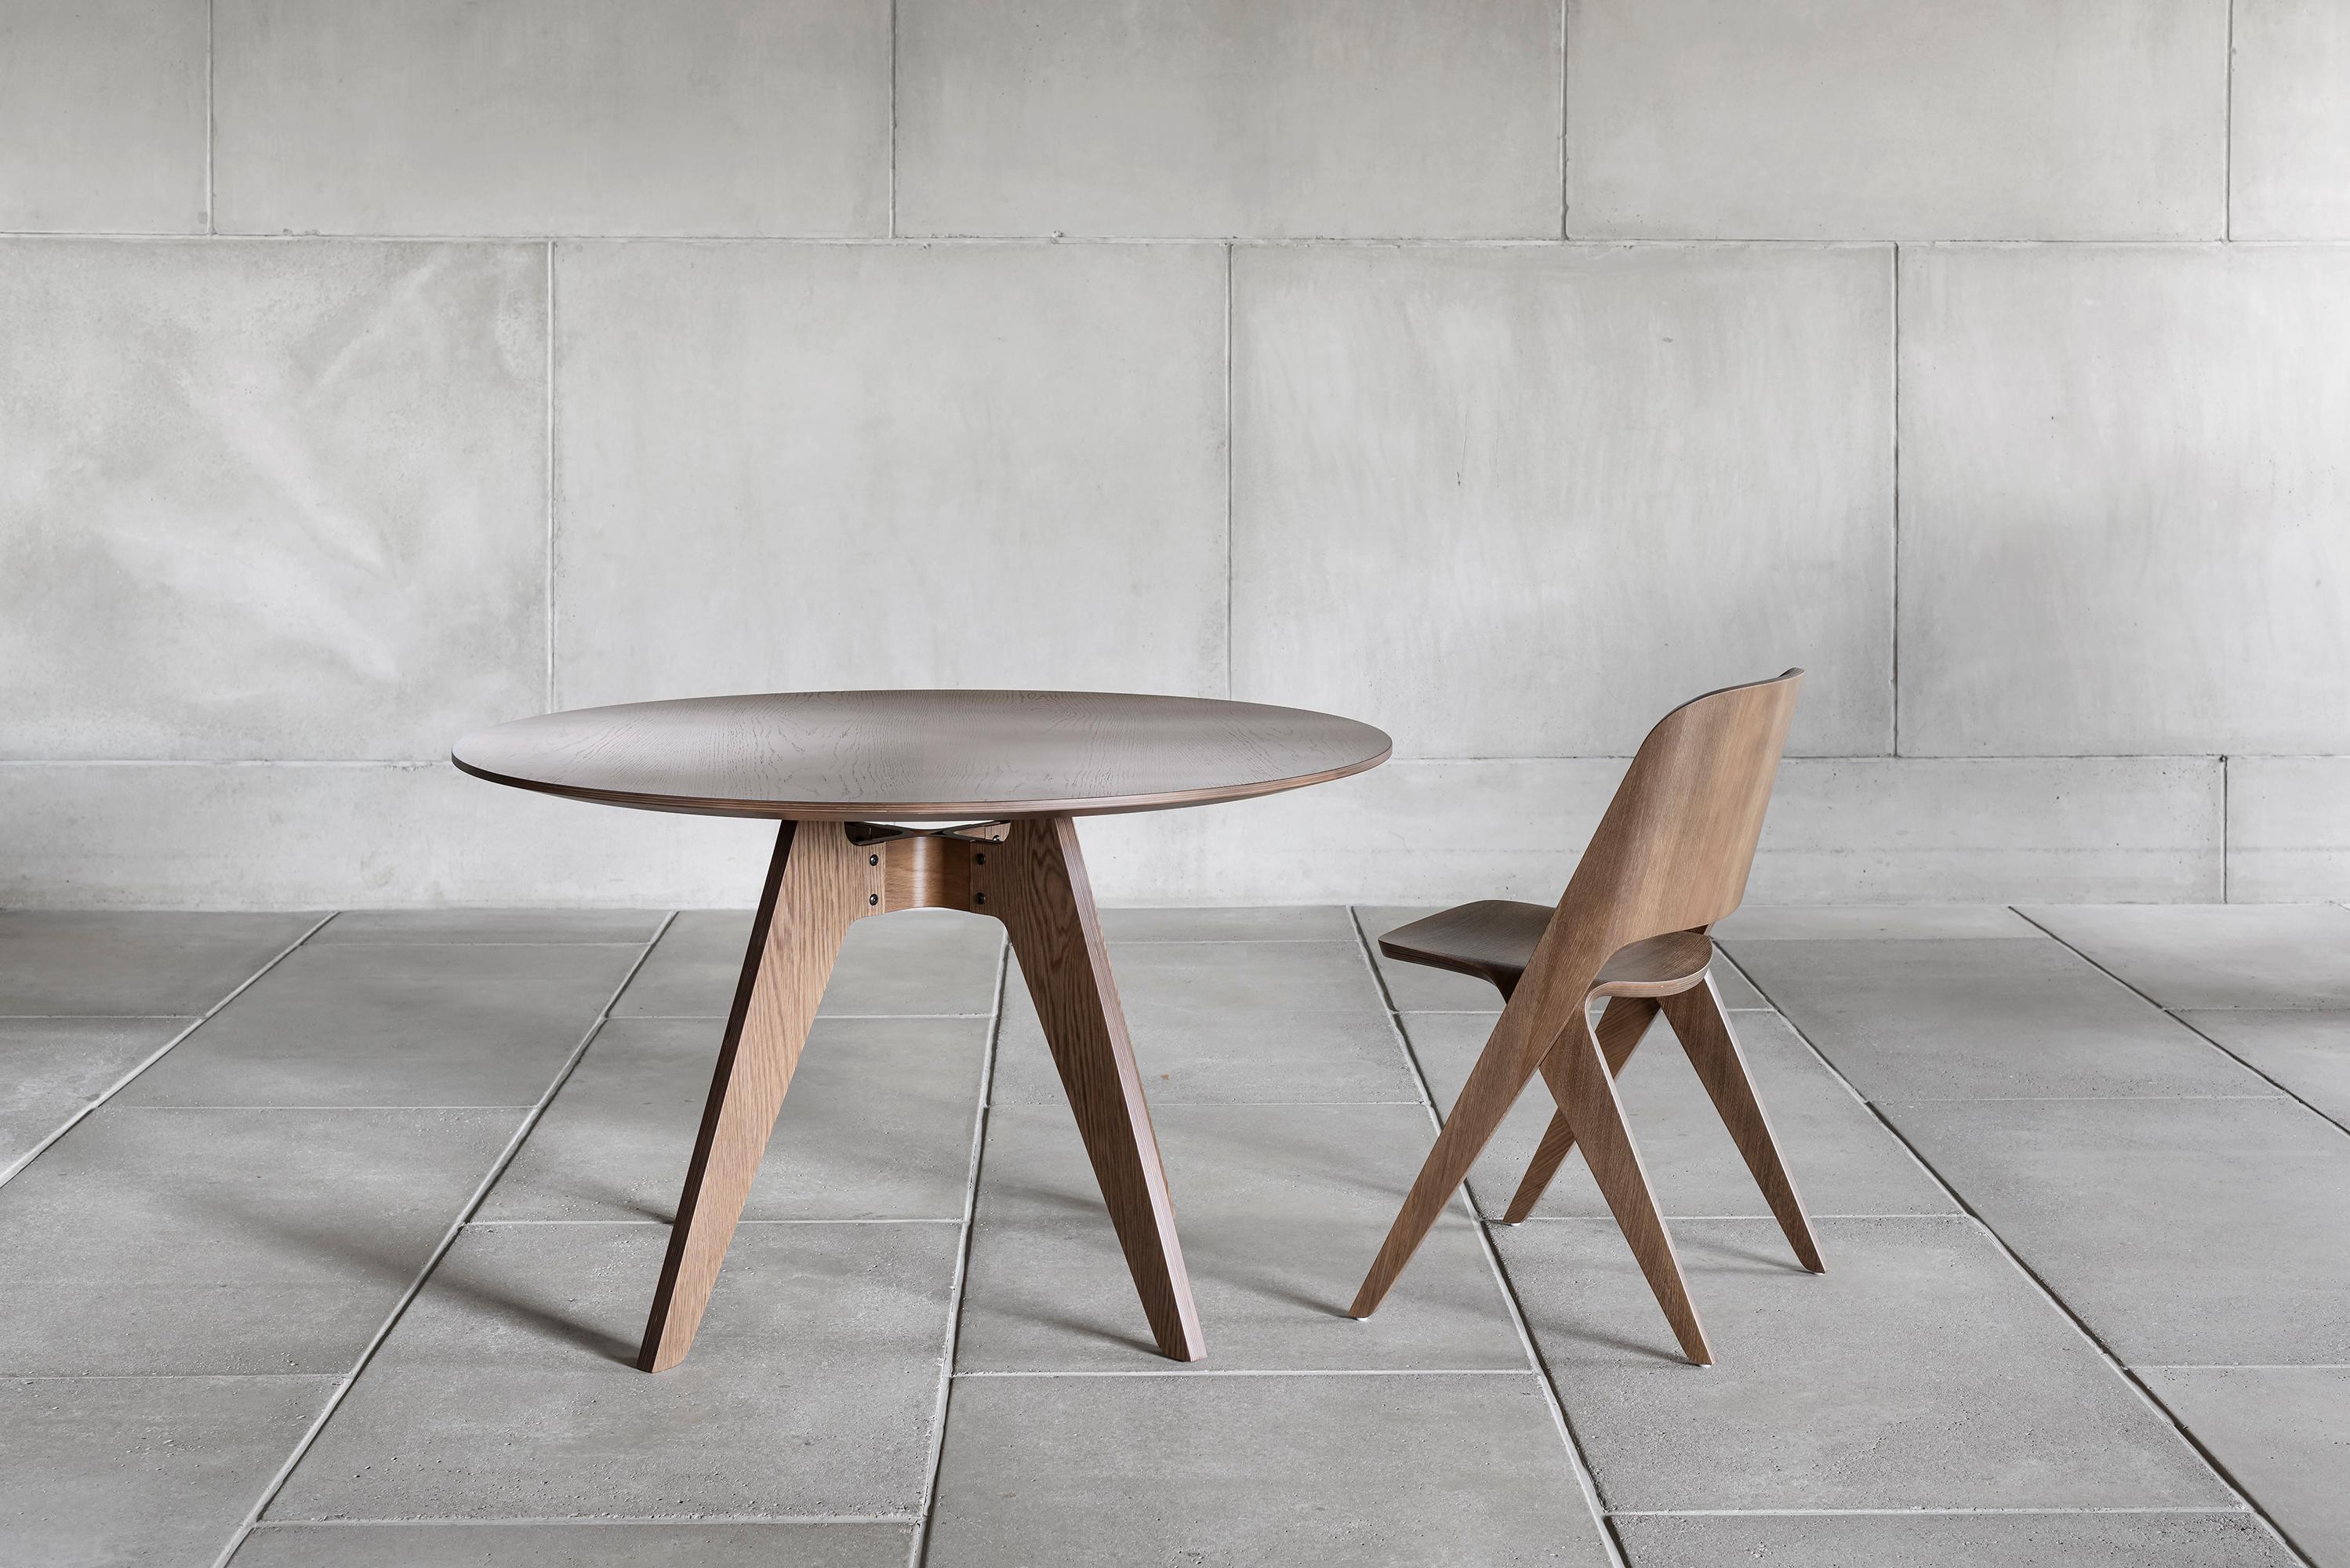 Lavitta round table (120 cm) designed by Timo Mikkonen & Antti Rouhunkoski
Collection Lavitta 2016 by Poiat 

Model shown on picture
Dimensions : H. 72 cm x D. 120 cm 
Color : Dark Oak 
Four legs 

The Lavitta Collection draws upon the